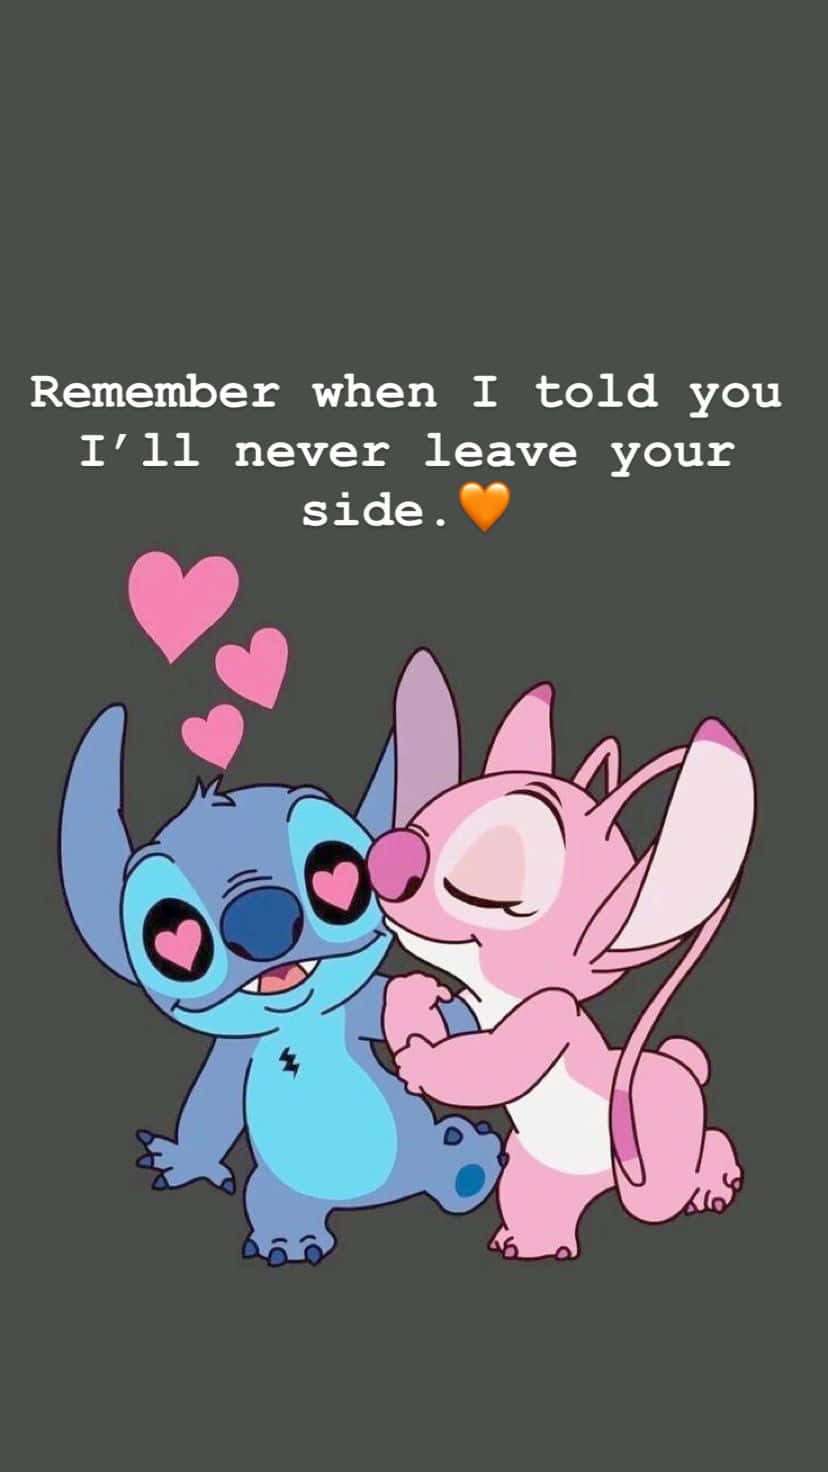 cute stitch and angel wallpaper for iphone